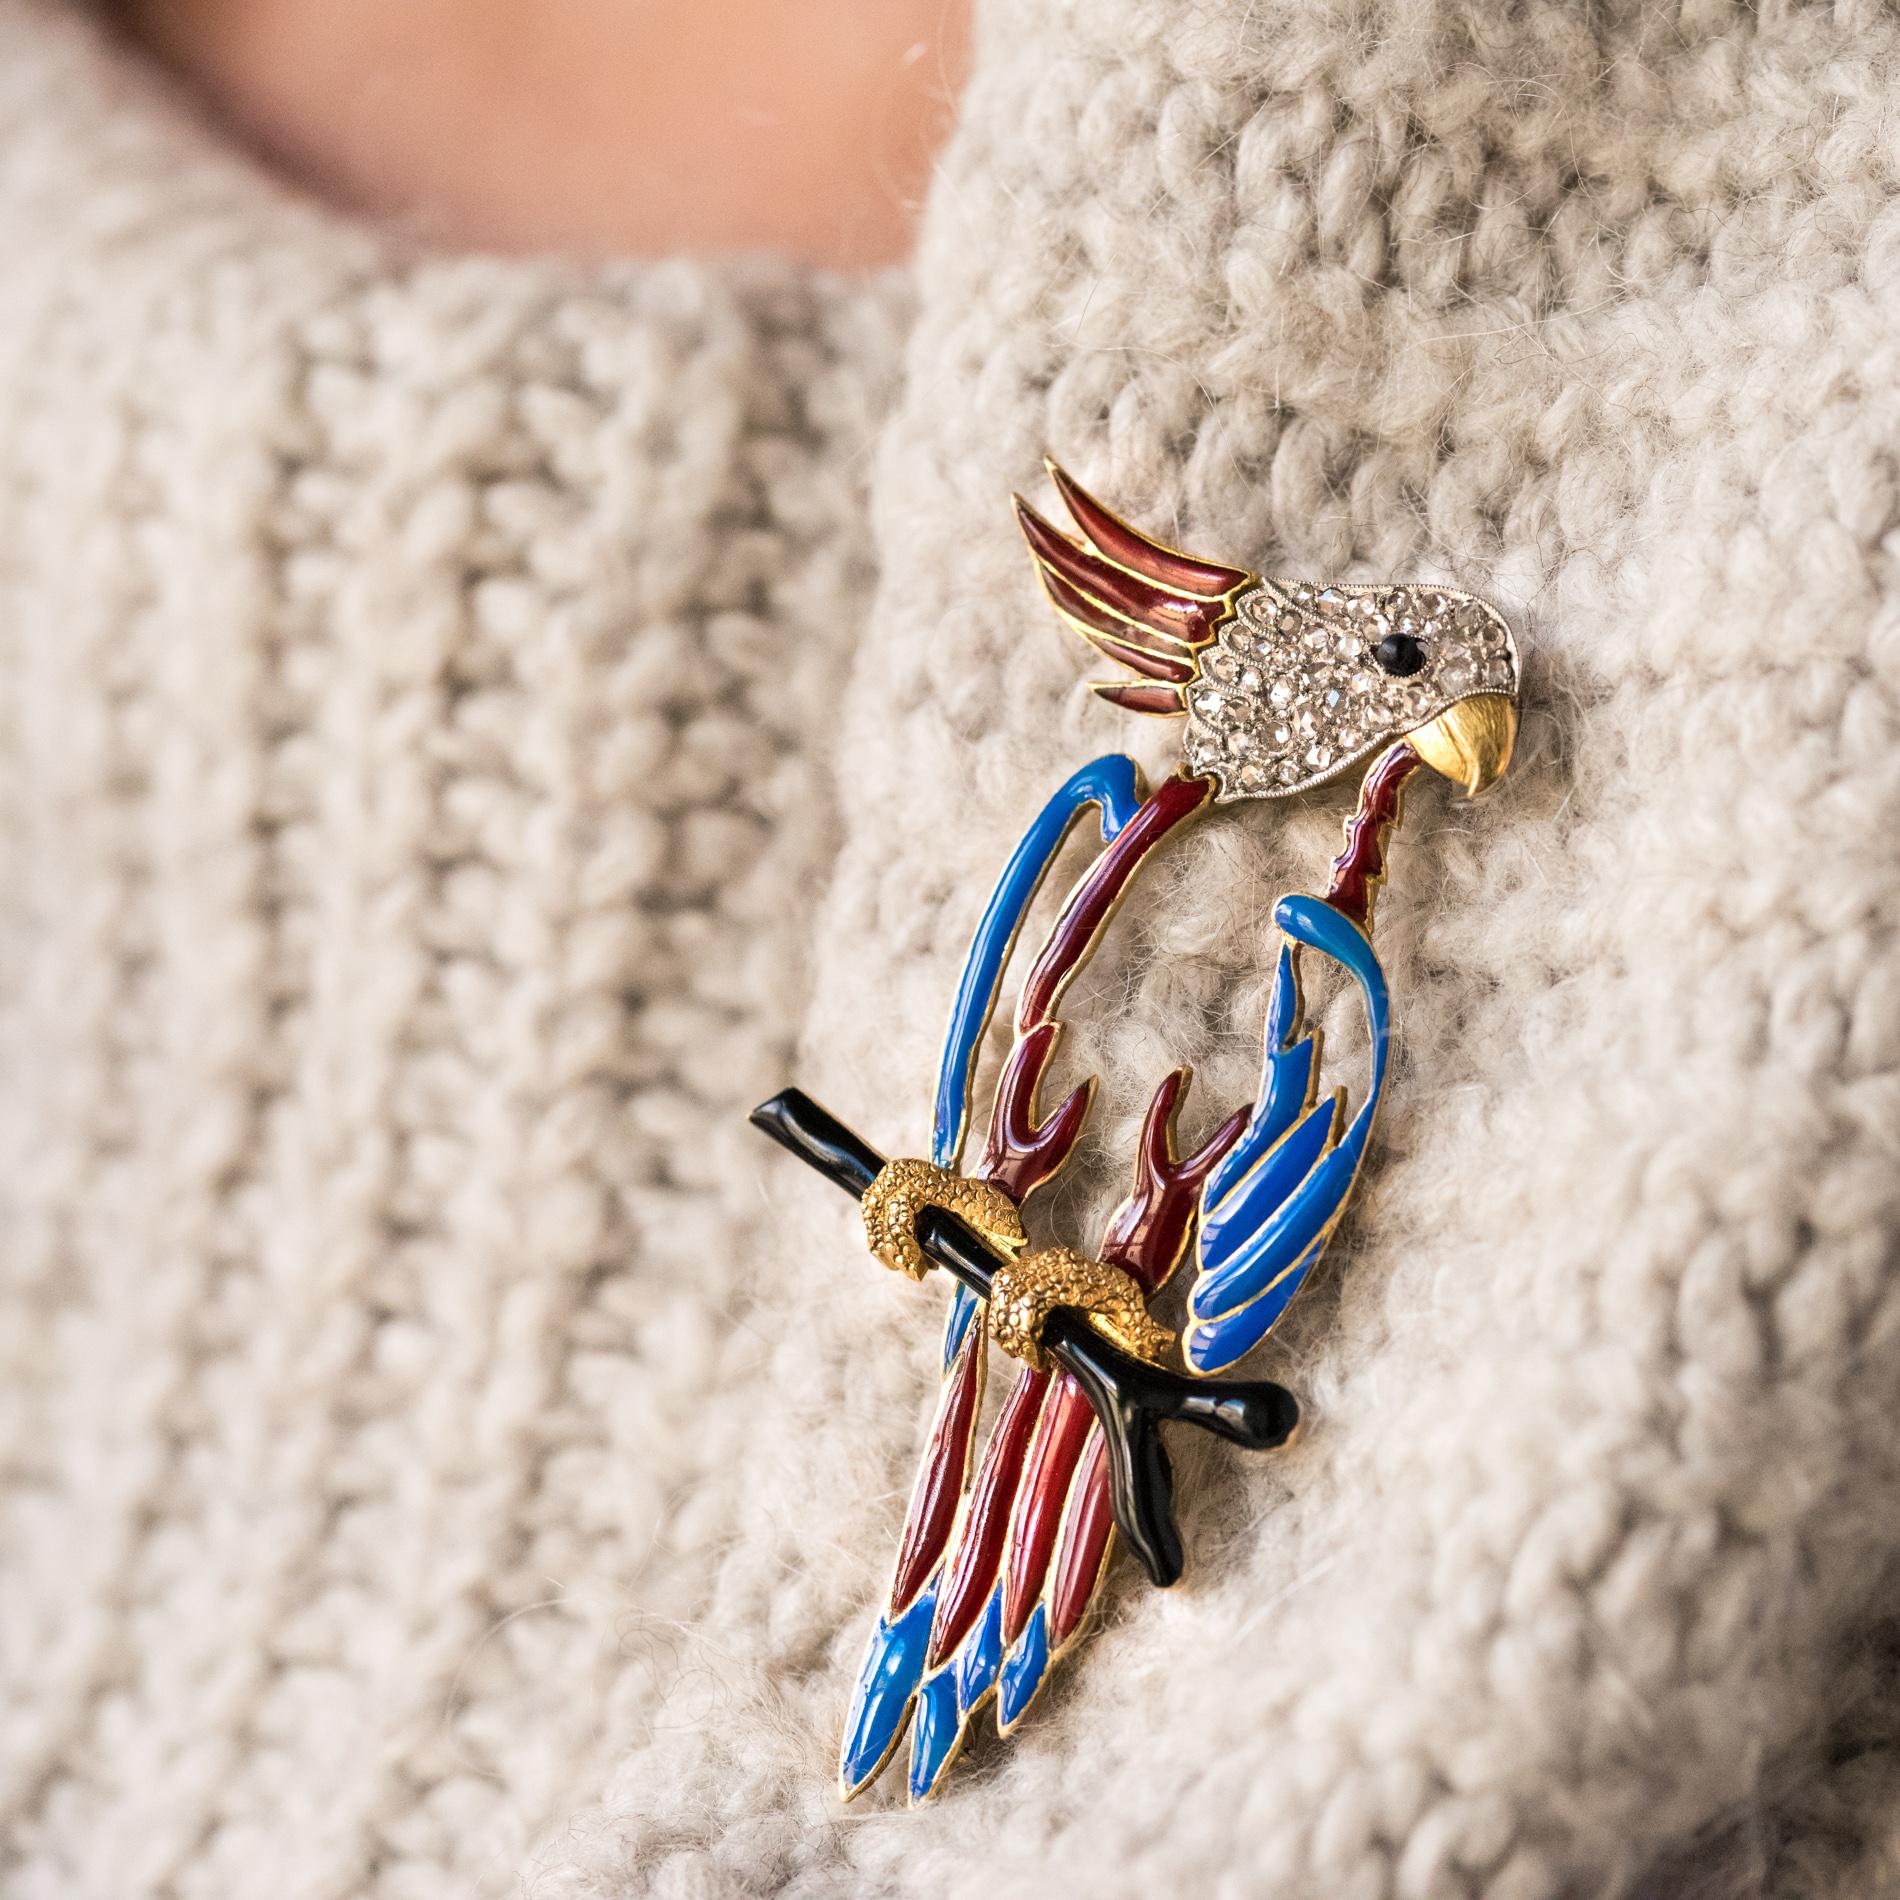 Brooch in 18 karats yellow gold, owl hallmark.
This incredible retro brooch represents a parrot whose body is pierced and enamelled blue and red. The bird is resting on a black enamelled gold branch. His head is set with rose-cut diamonds and red